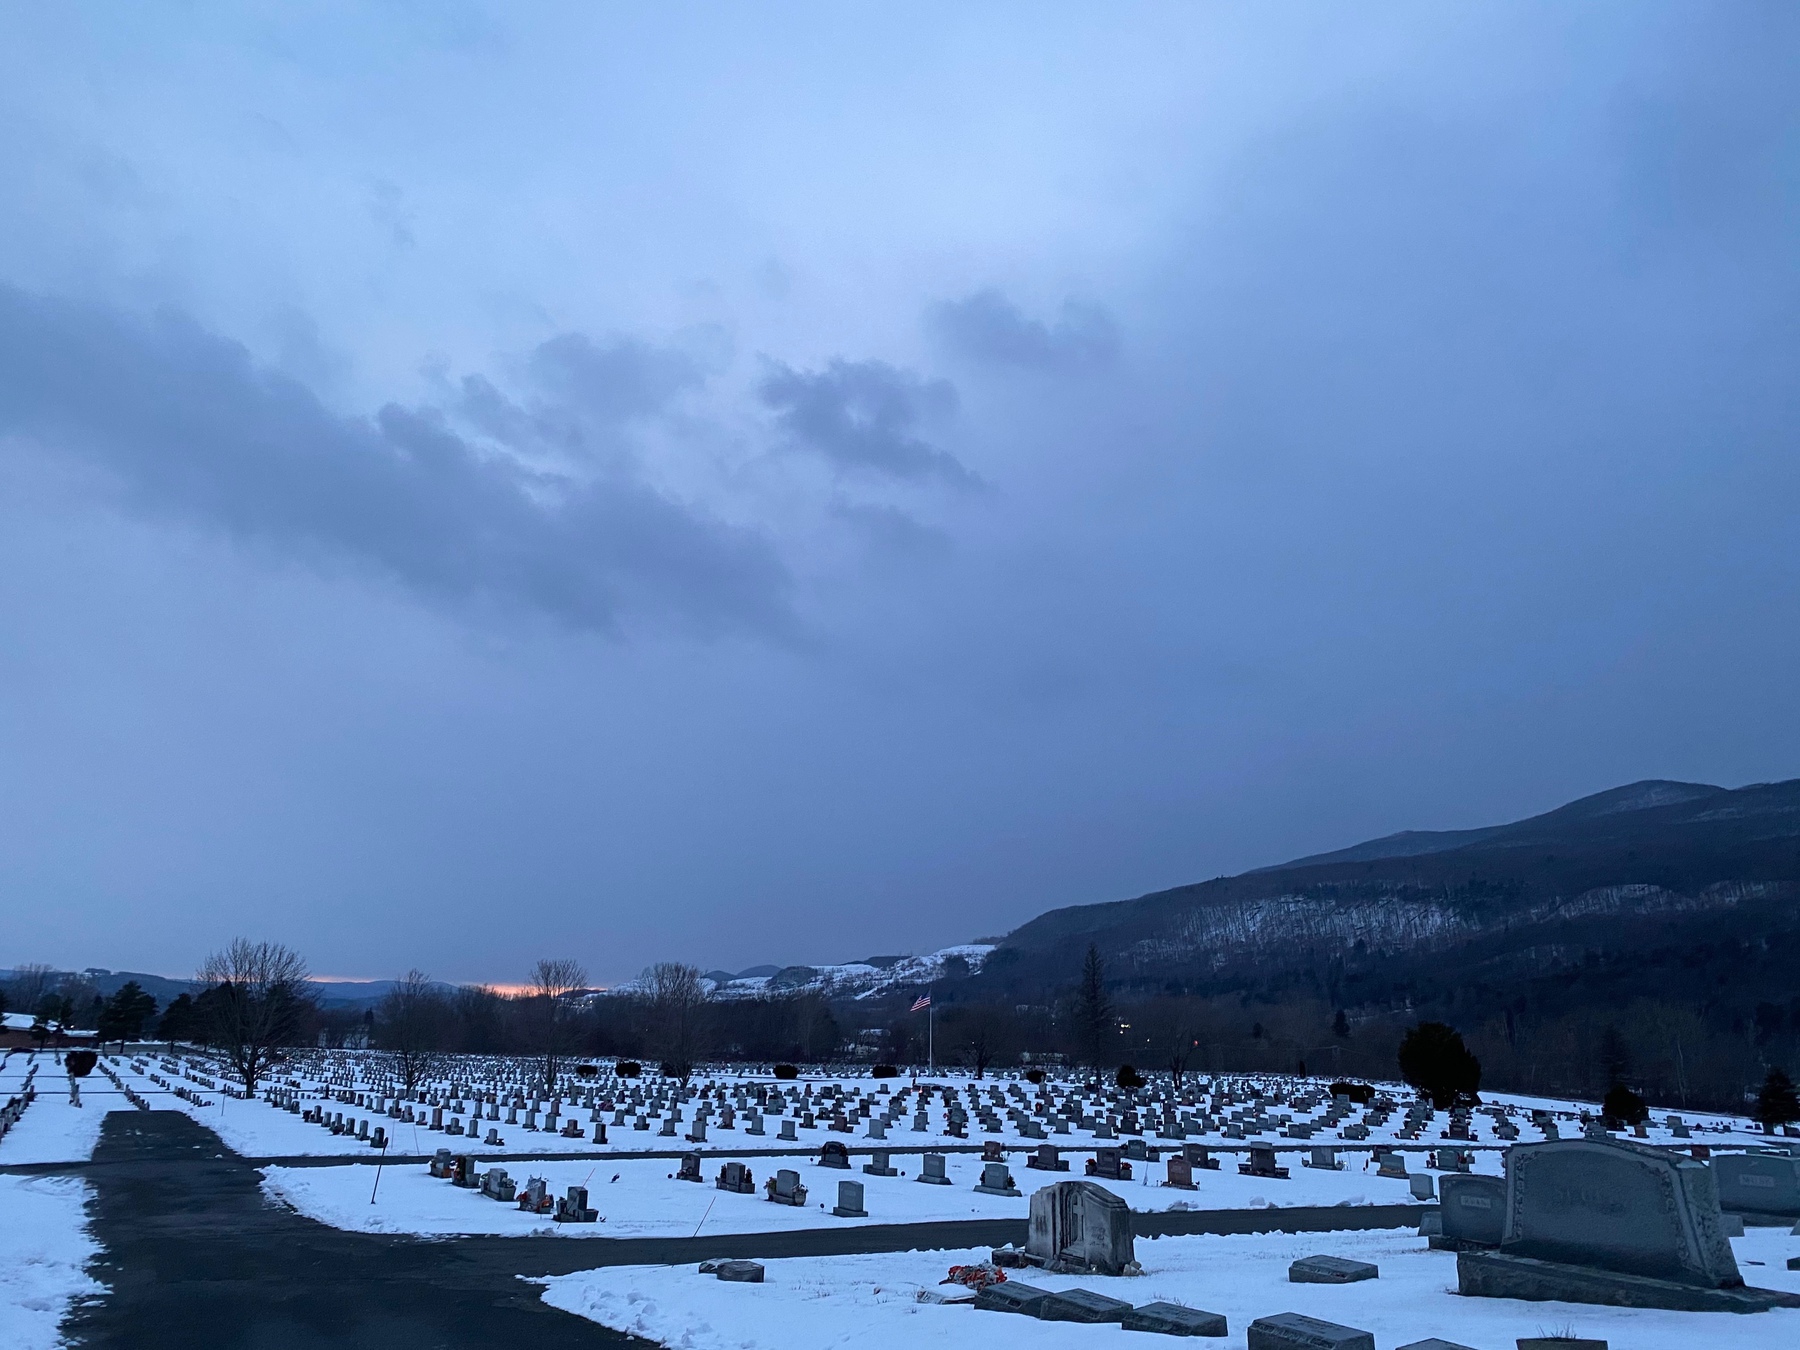 View of a snow covered cemetary, with tombstones all in rows and a cloudy gray sky above.